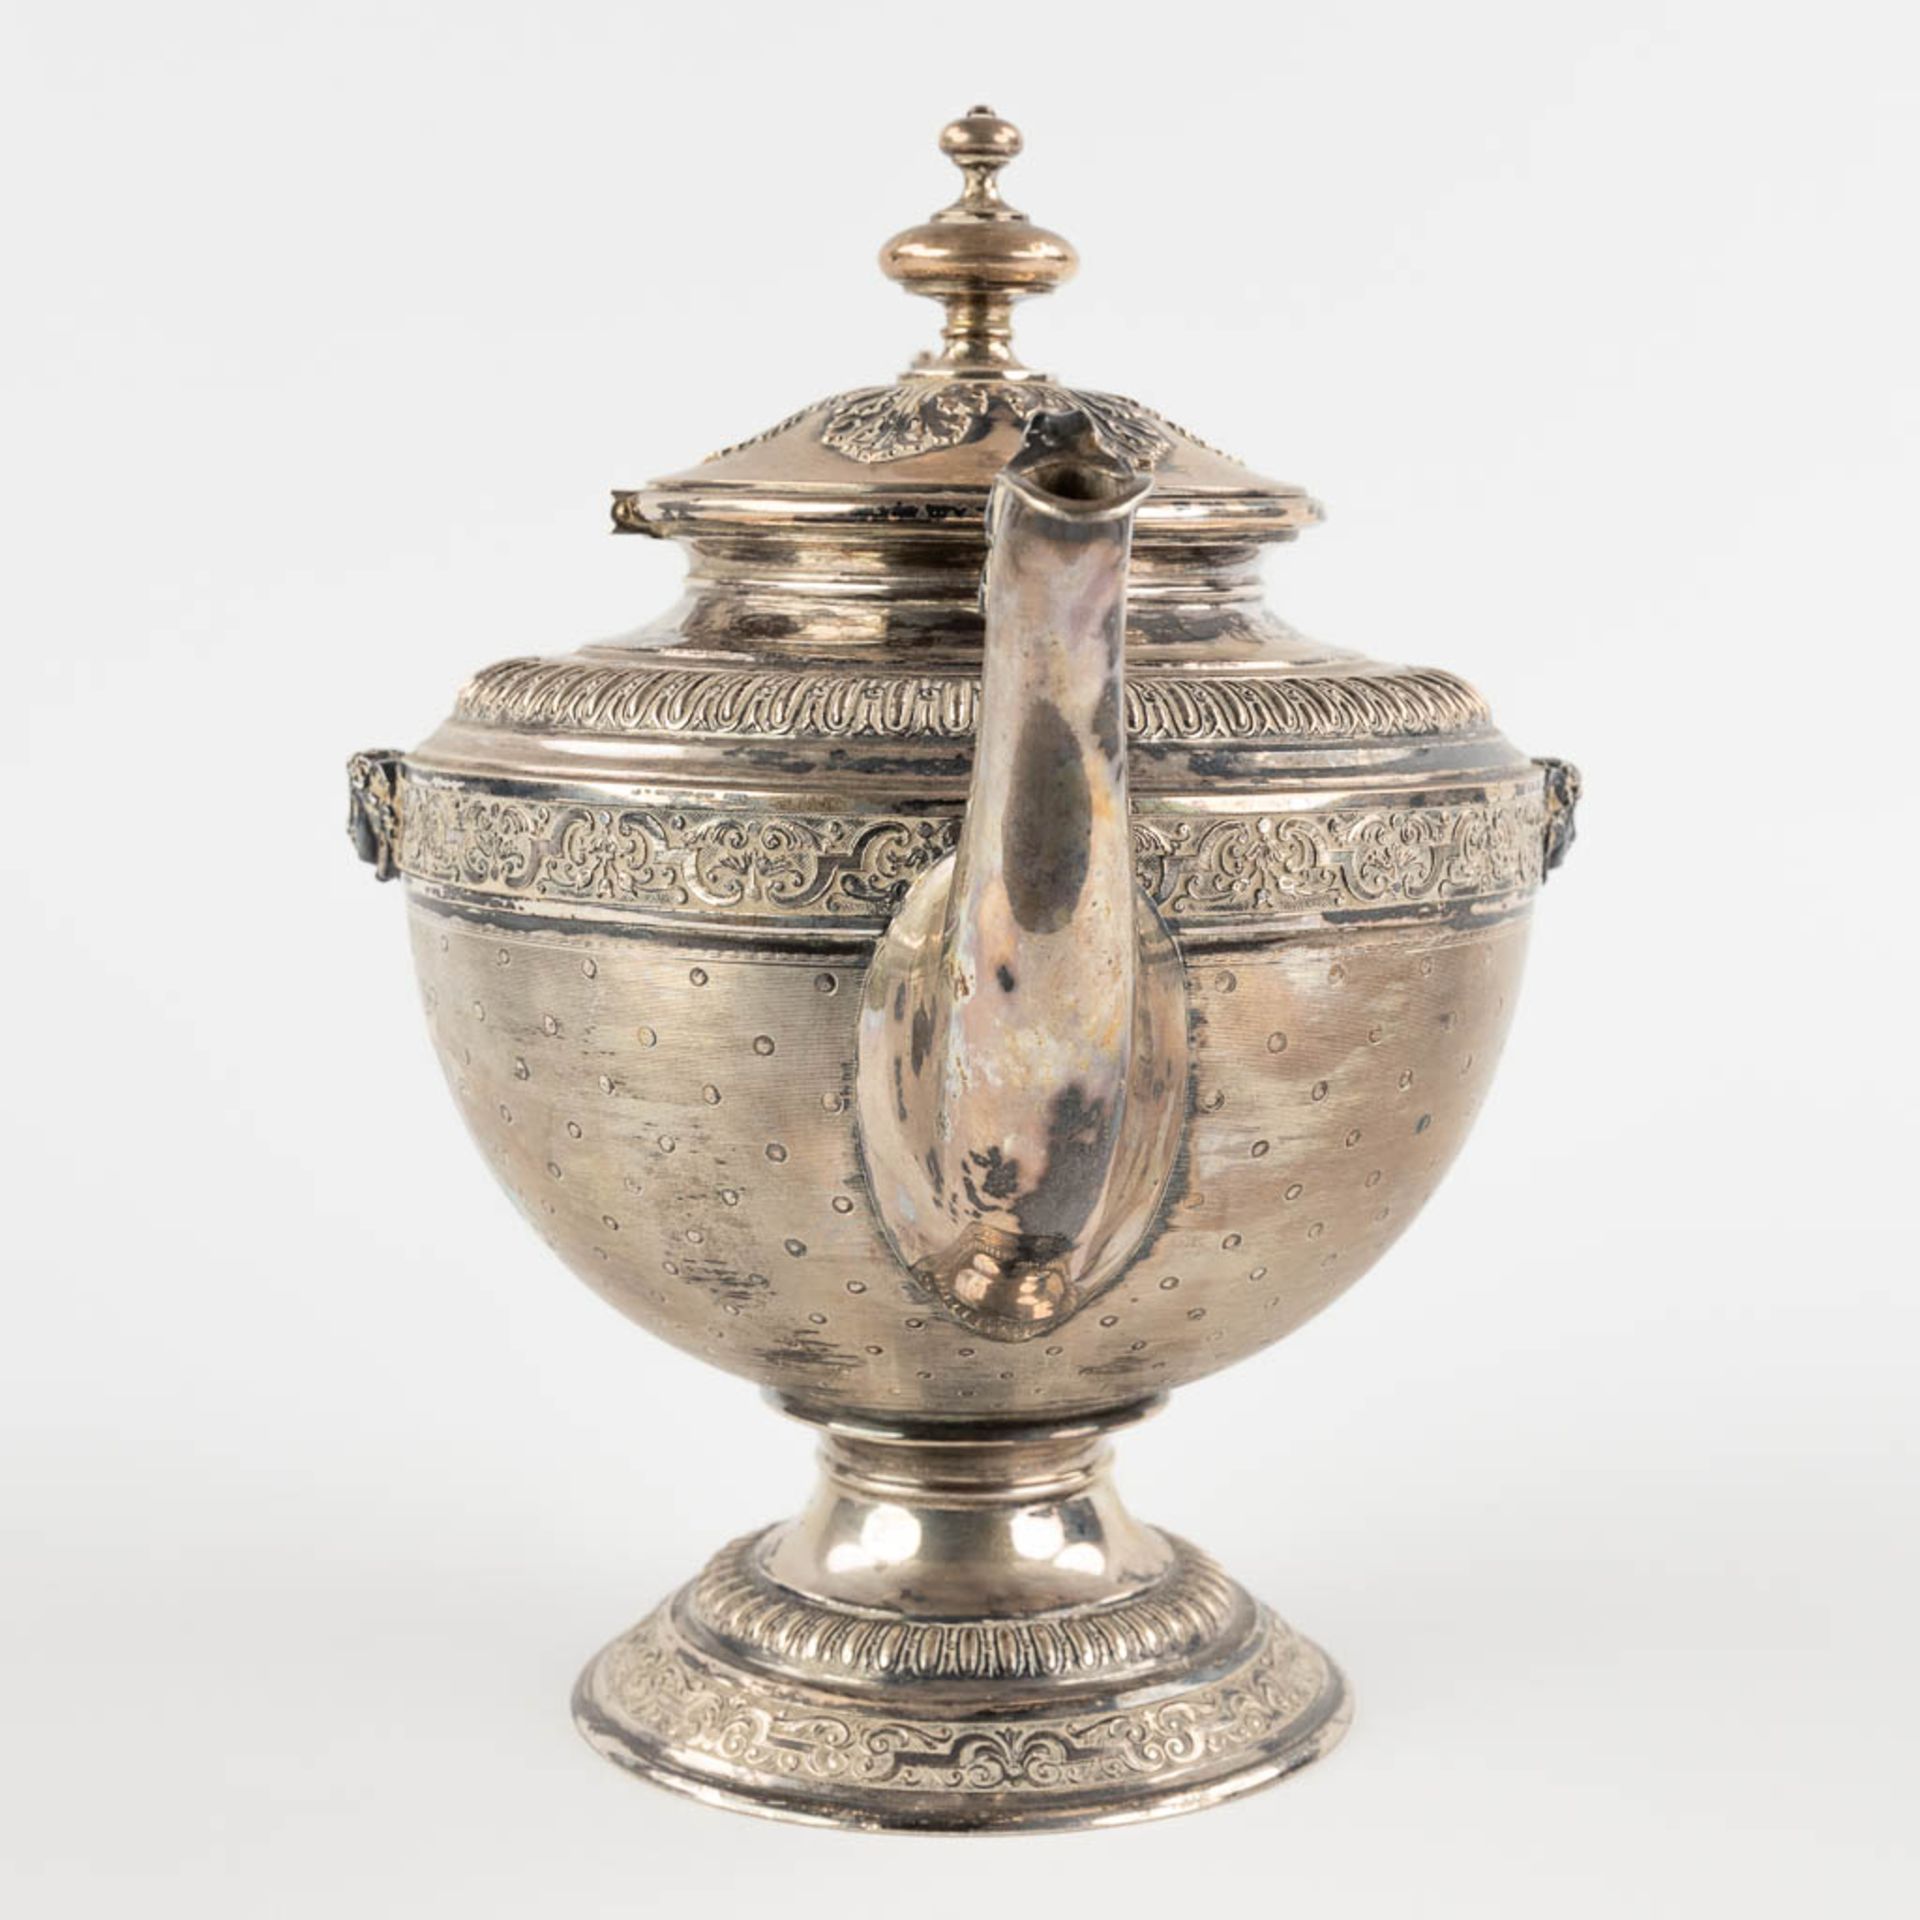 A teapot, silver, Germany. Gross: 659g. (D:16 x W:26 x H:21 cm) - Image 6 of 12